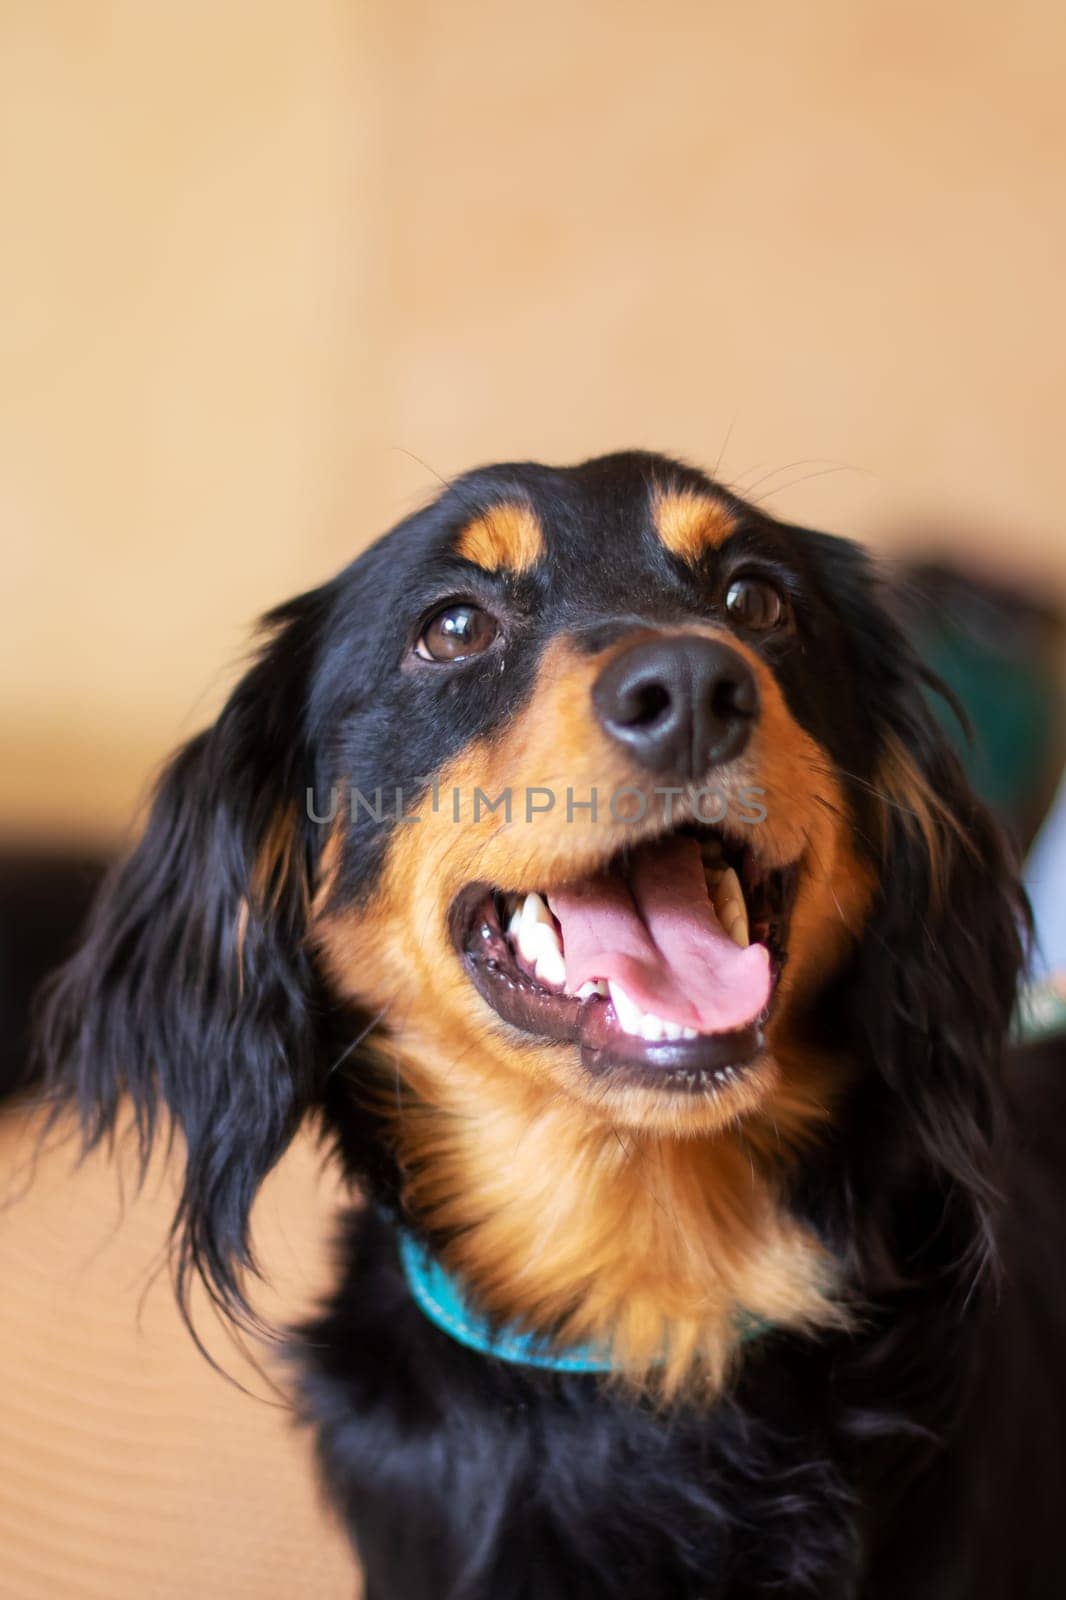 A large black and brown dog from the Sporting Group with its mouth open. This carnivorous companion dog has a long snout, whiskers, and a thick fur coat. Belongs to the Canidae family